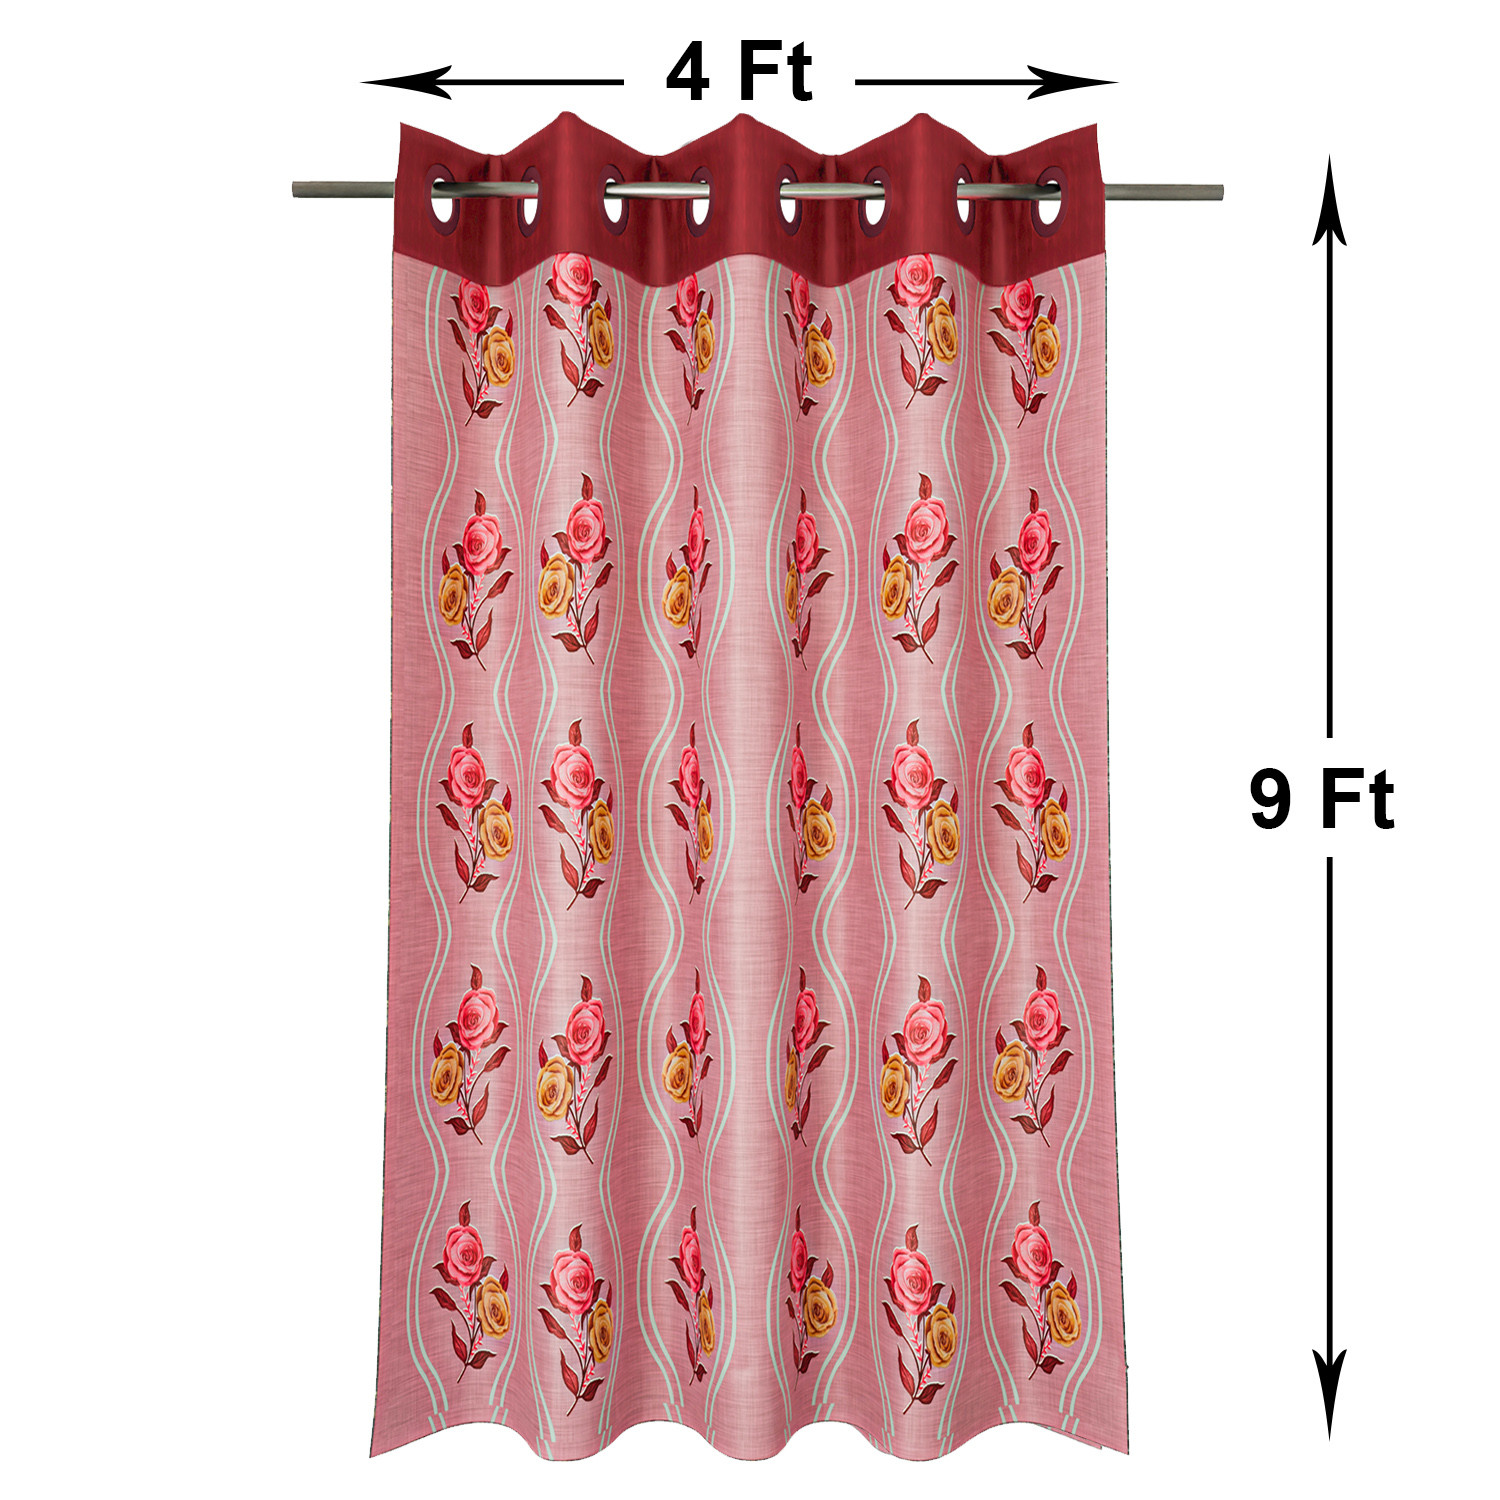 Kuber Industries Polyester Decorative 9 Feet Long Door Curtain | Rose Print Blackout Drapes Curtain With 8 Eyelet For Home & Office (Pink)